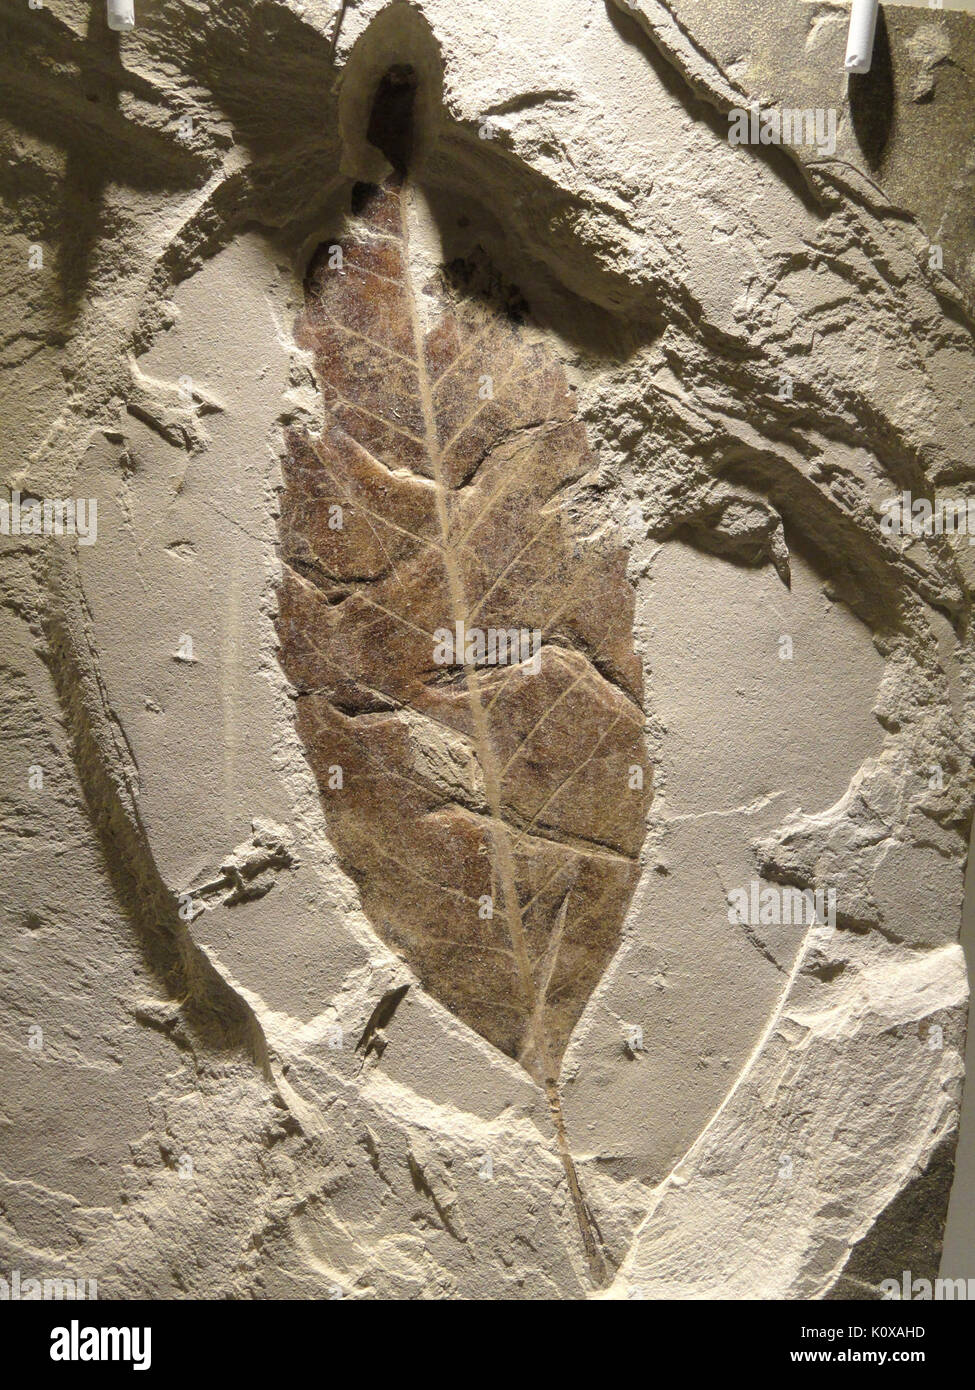 Allophylus rexifolia leaf, Late Early Eocene, Lost Cabin Age, Green River Formation, Bonanza, Unitah County, Utah, USA   Houston Museum of Natural Science   DSC01947 Stock Photo